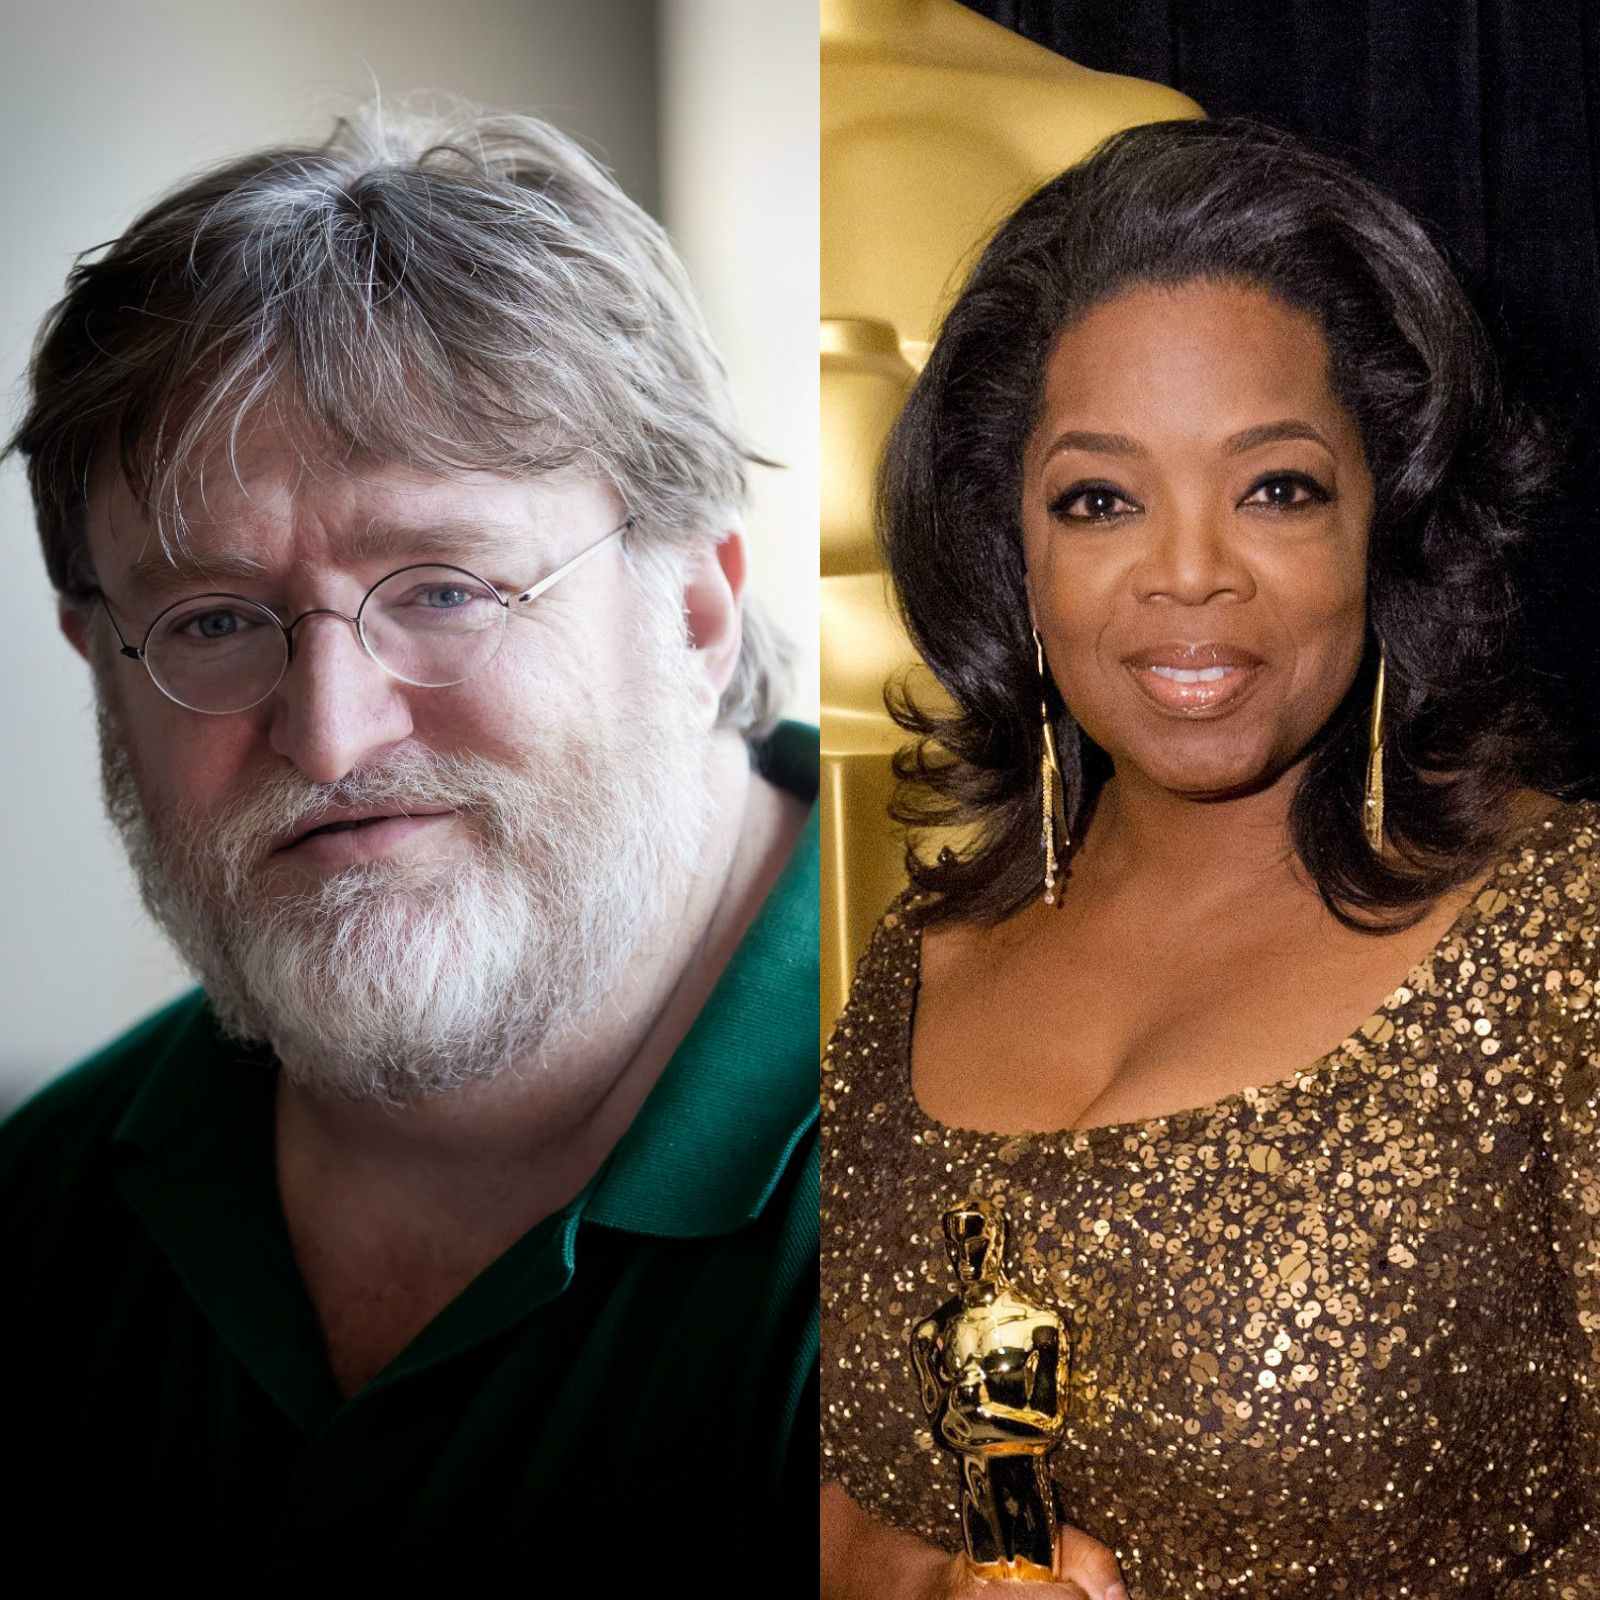 Gabe Newell has his Oprah moment and gives EVERYONE at Vision Summit a  free HTC Vive